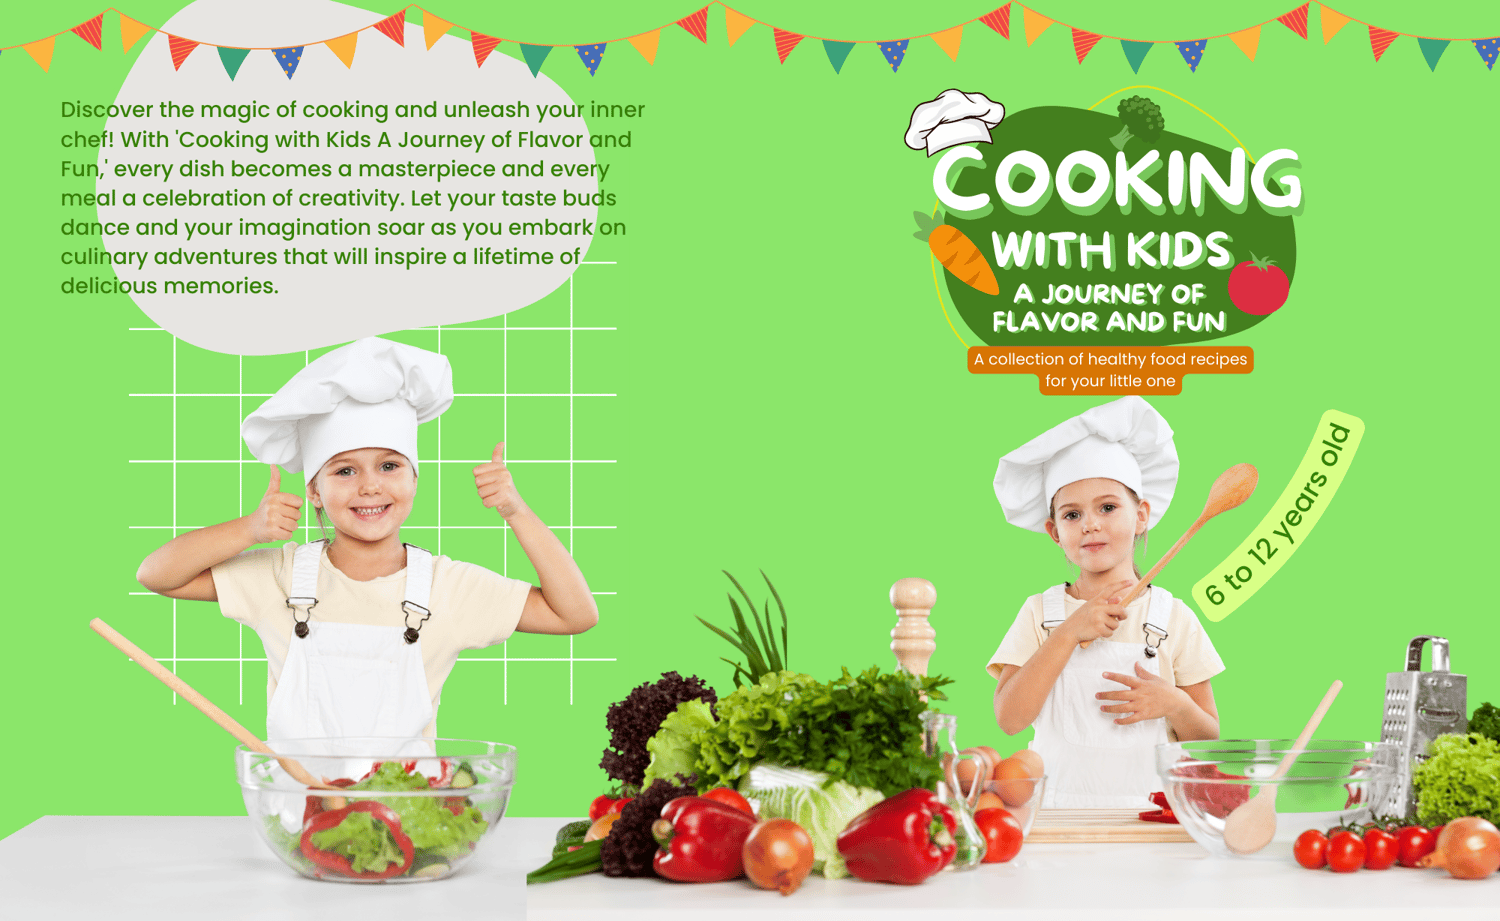 Cooking with Kids A Journey of Flavor and Fun - Super Awesome, Crazy Fun, Best Ever Cookbook